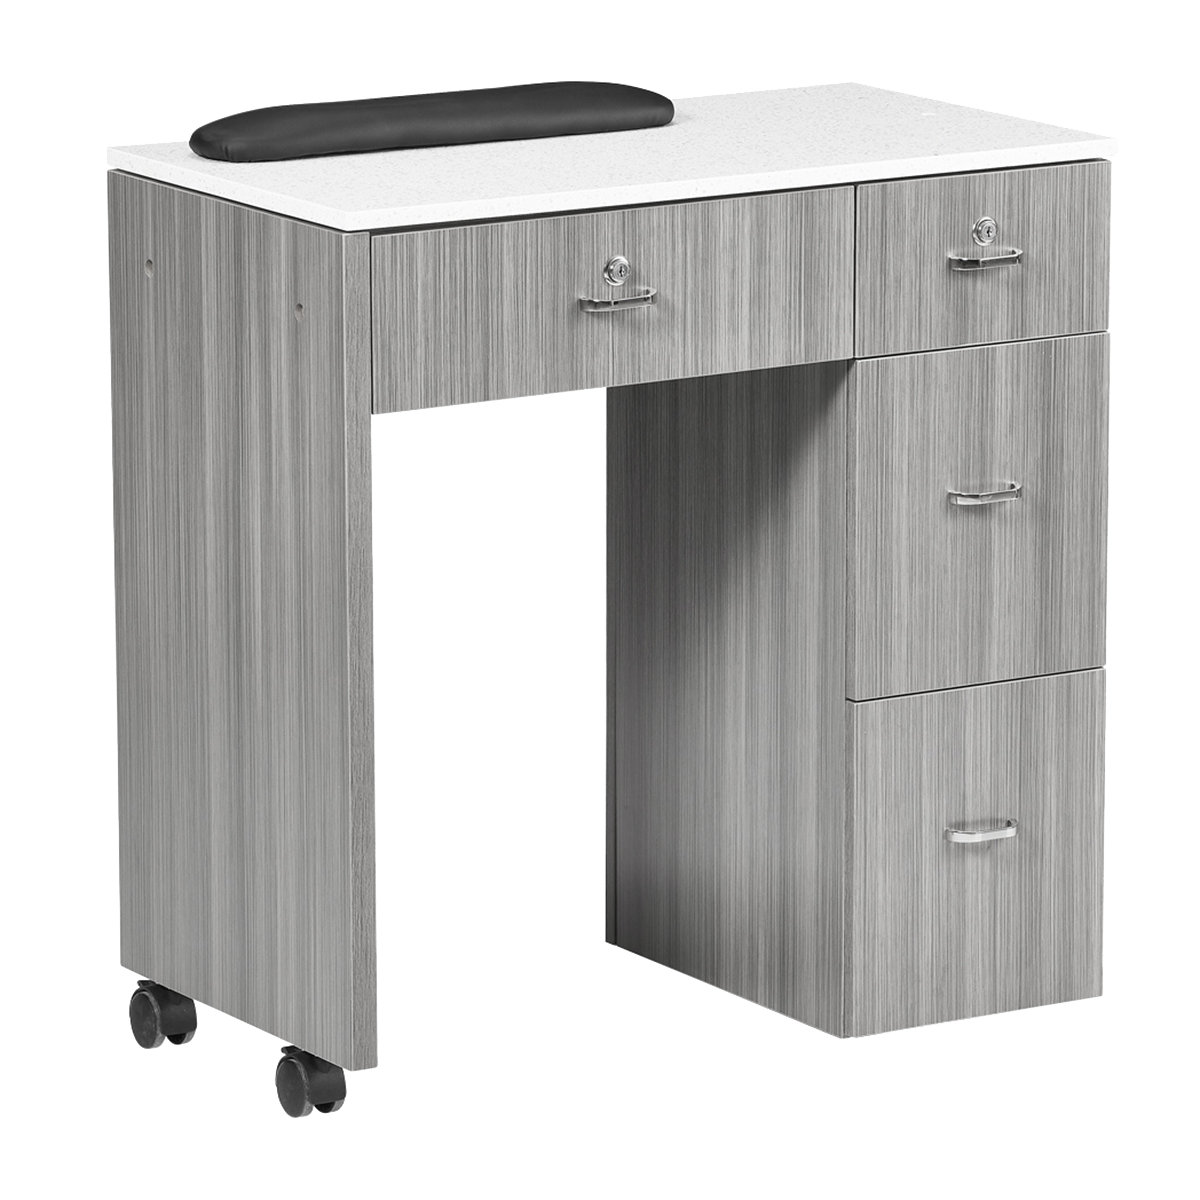 Whale Spa Manicure Table NM904 Nail Salon Table with Drawers, Quartz Countertop | Salon and Spa Furniture